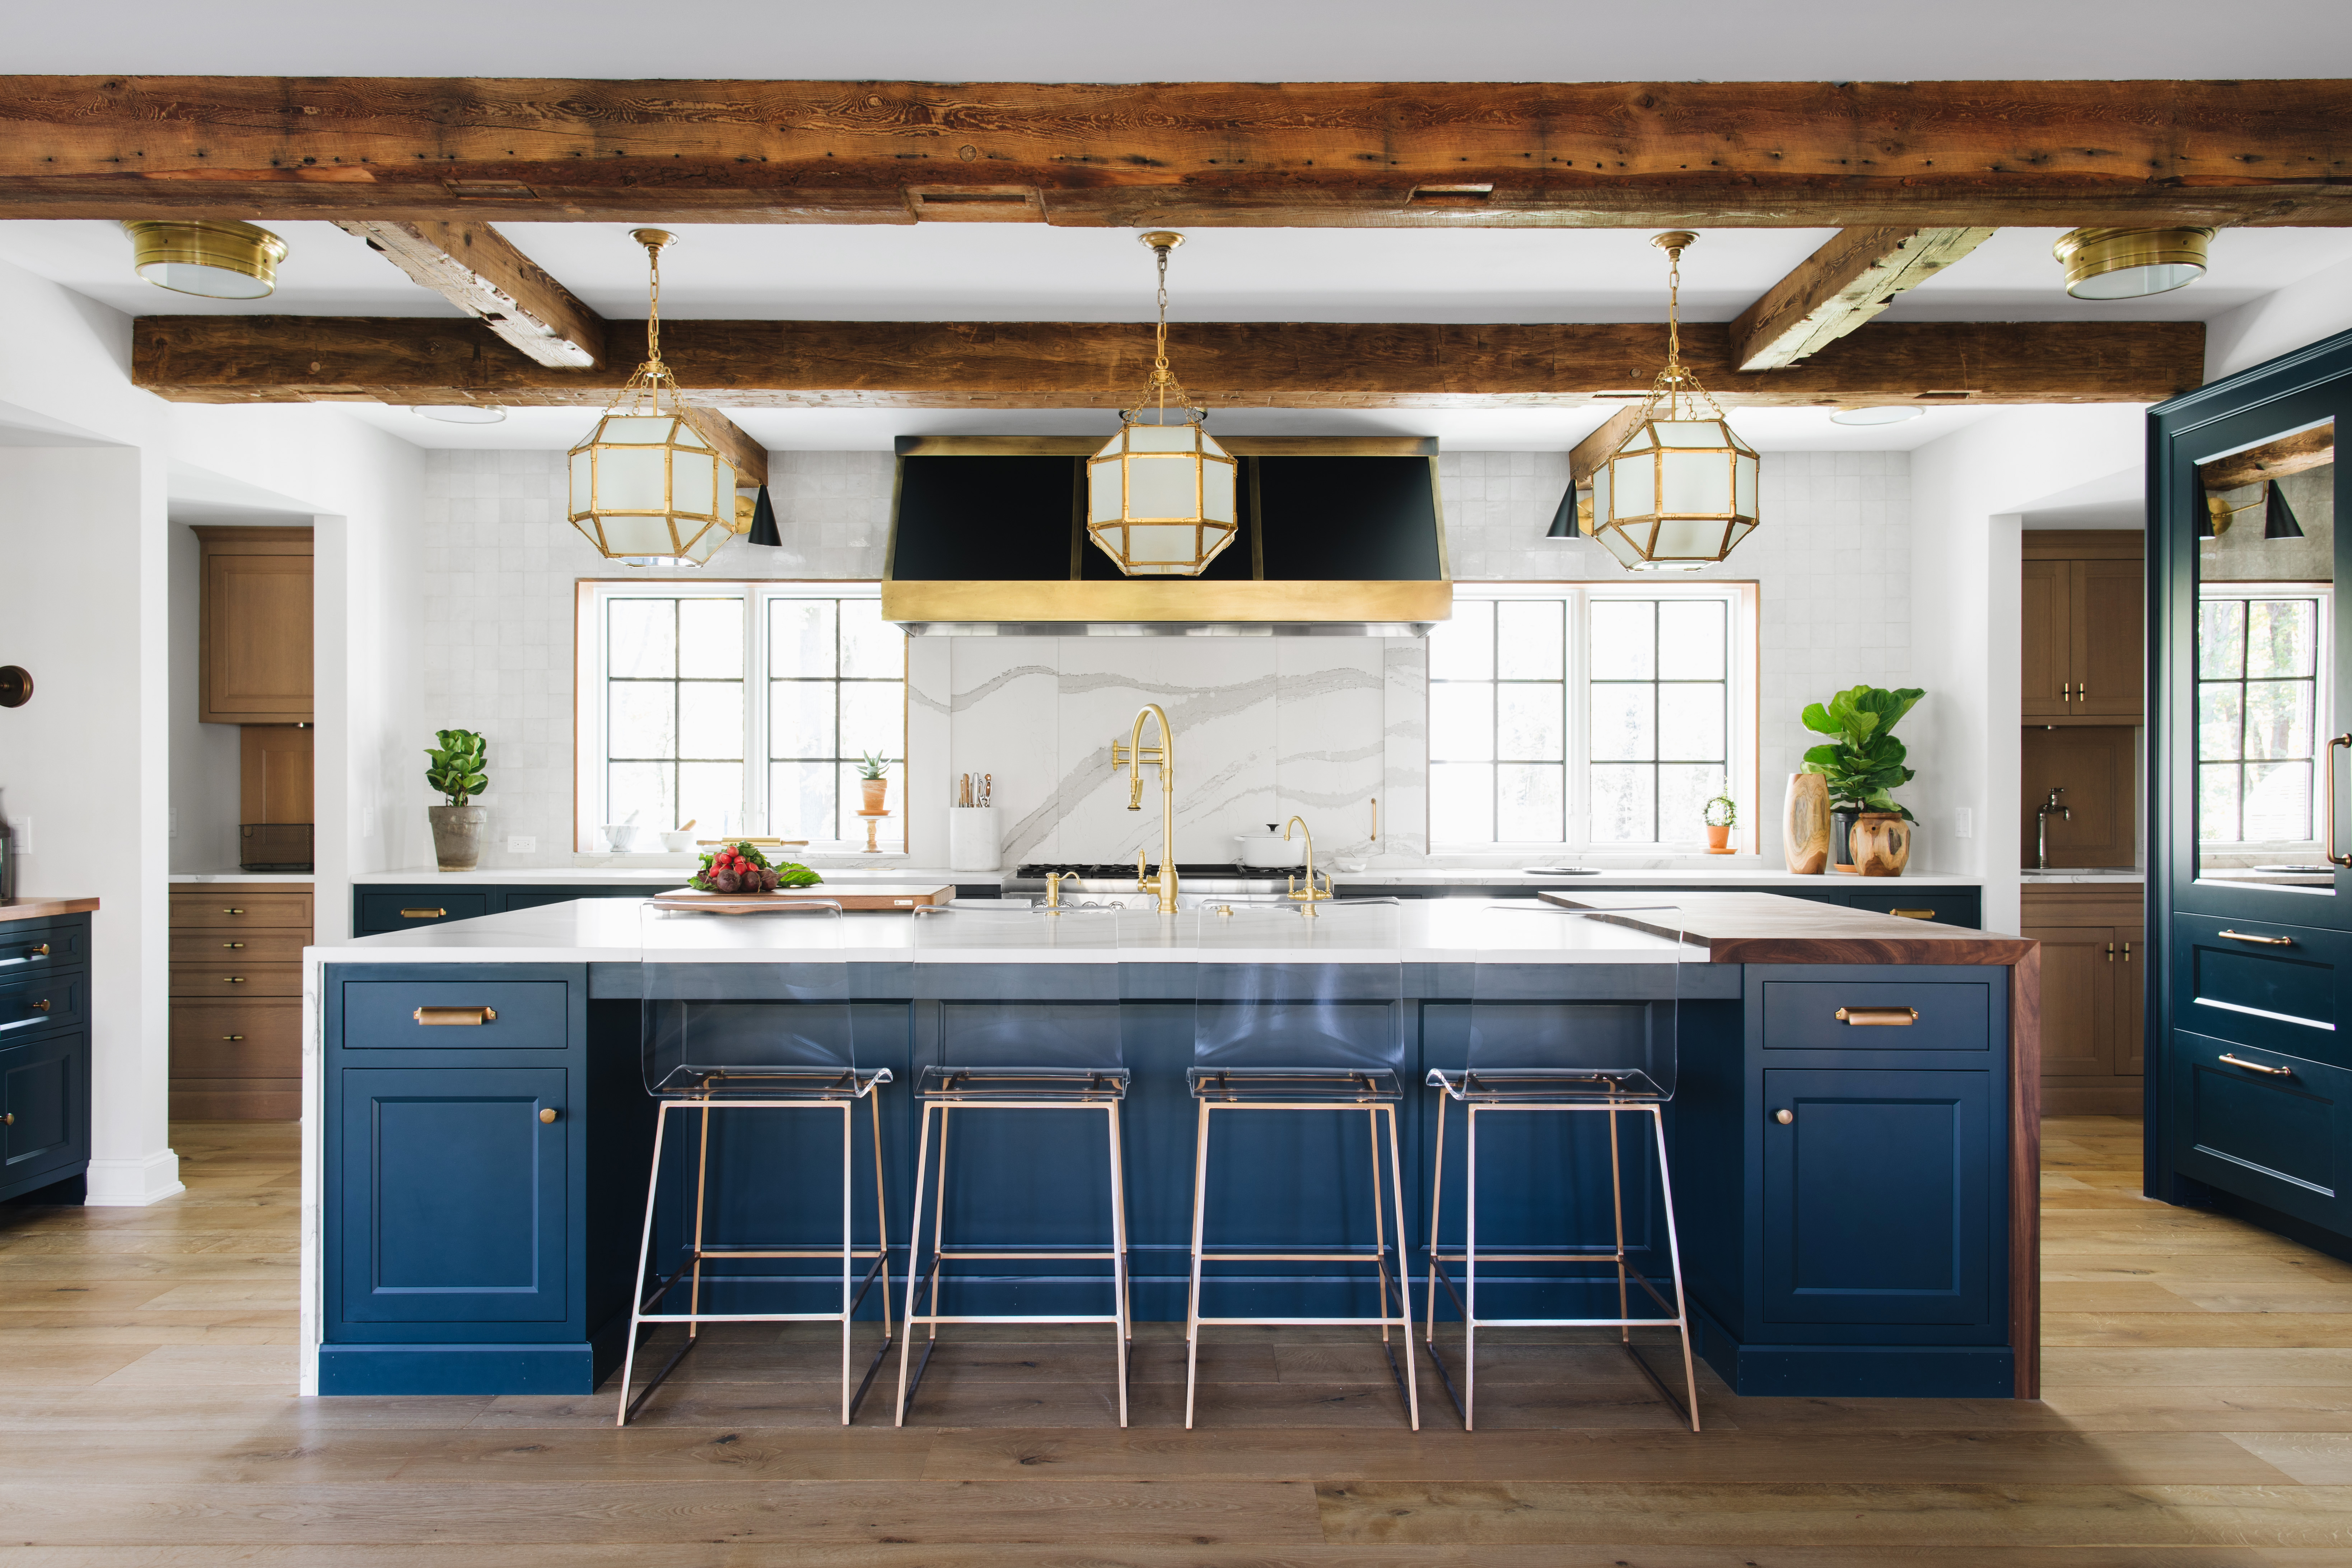 Transitional White Kitchen With Light Blue Cabinets and Brass